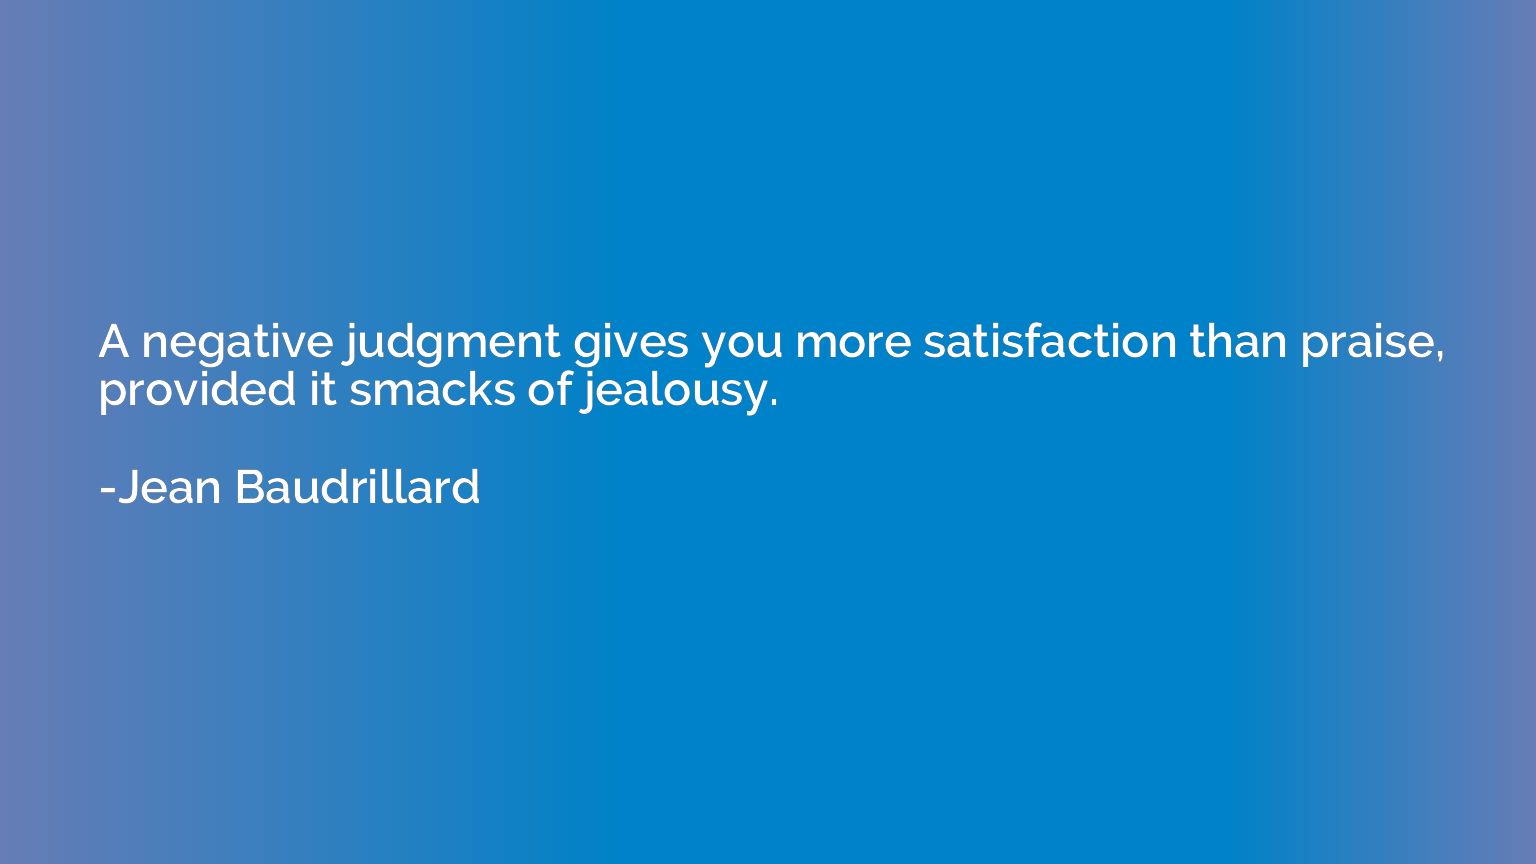 A negative judgment gives you more satisfaction than praise,